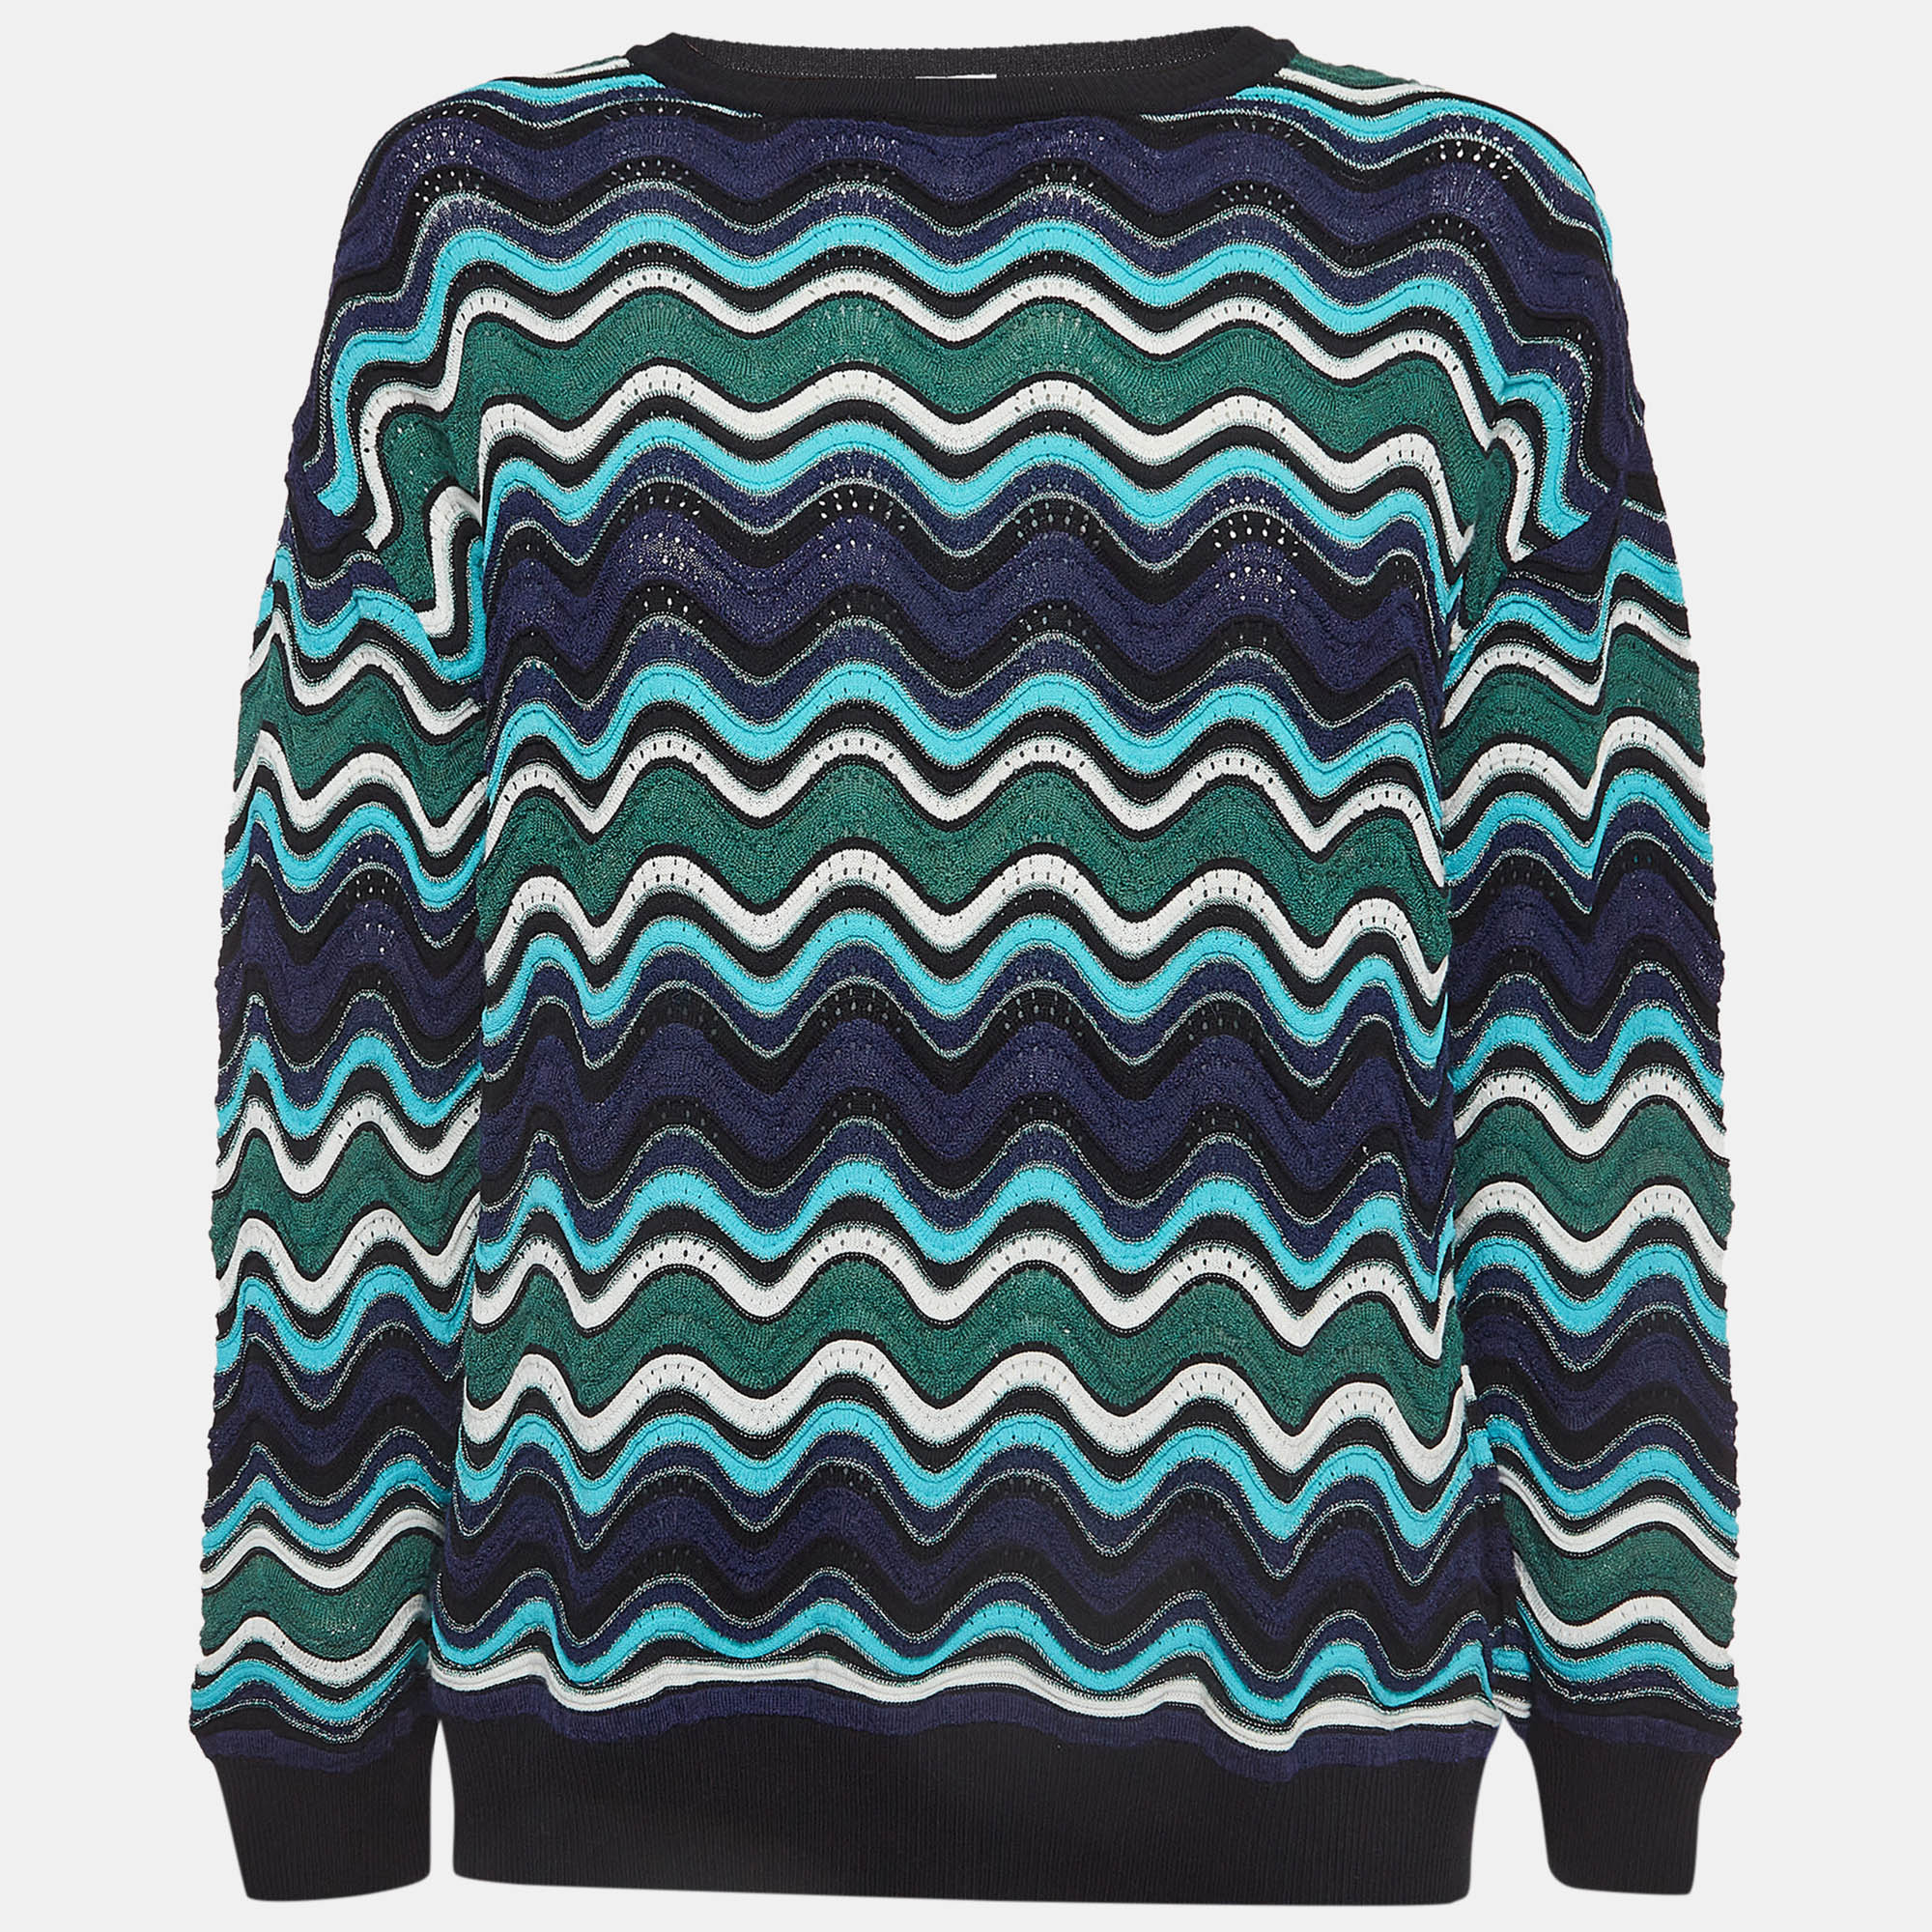 Pre-owned M Missoni Multicolor Chevron Patterned Knit Sweater M